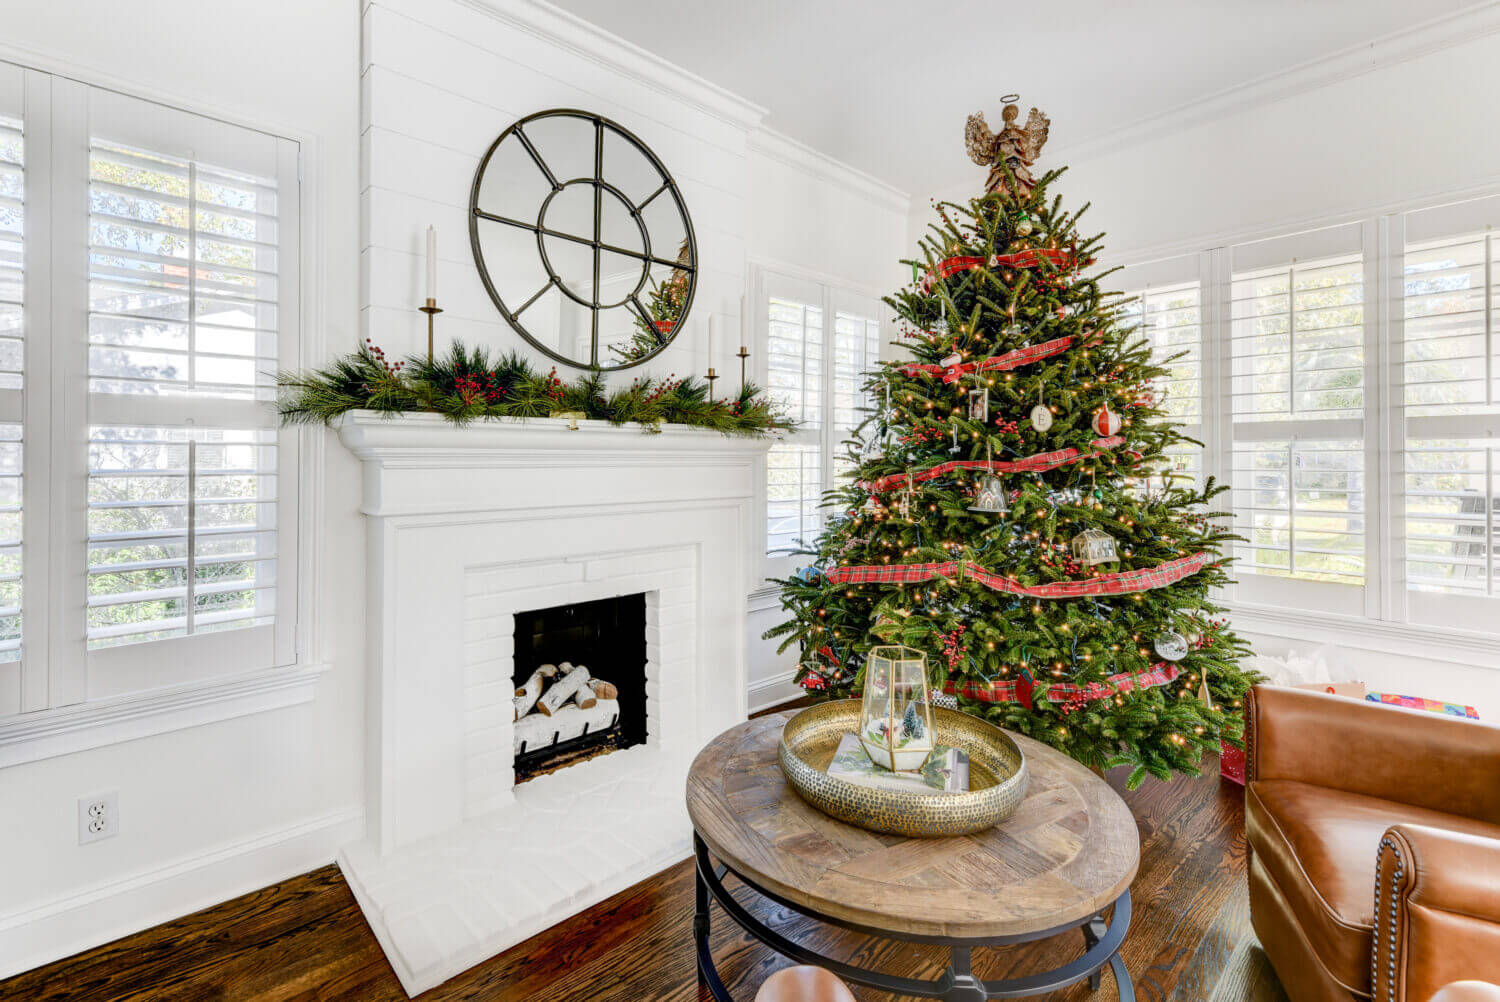 All decorated for Christmas, this bright white home has an all white fireplace mantel with a white hearth that coordinates with kitchen cabinets and countertops.